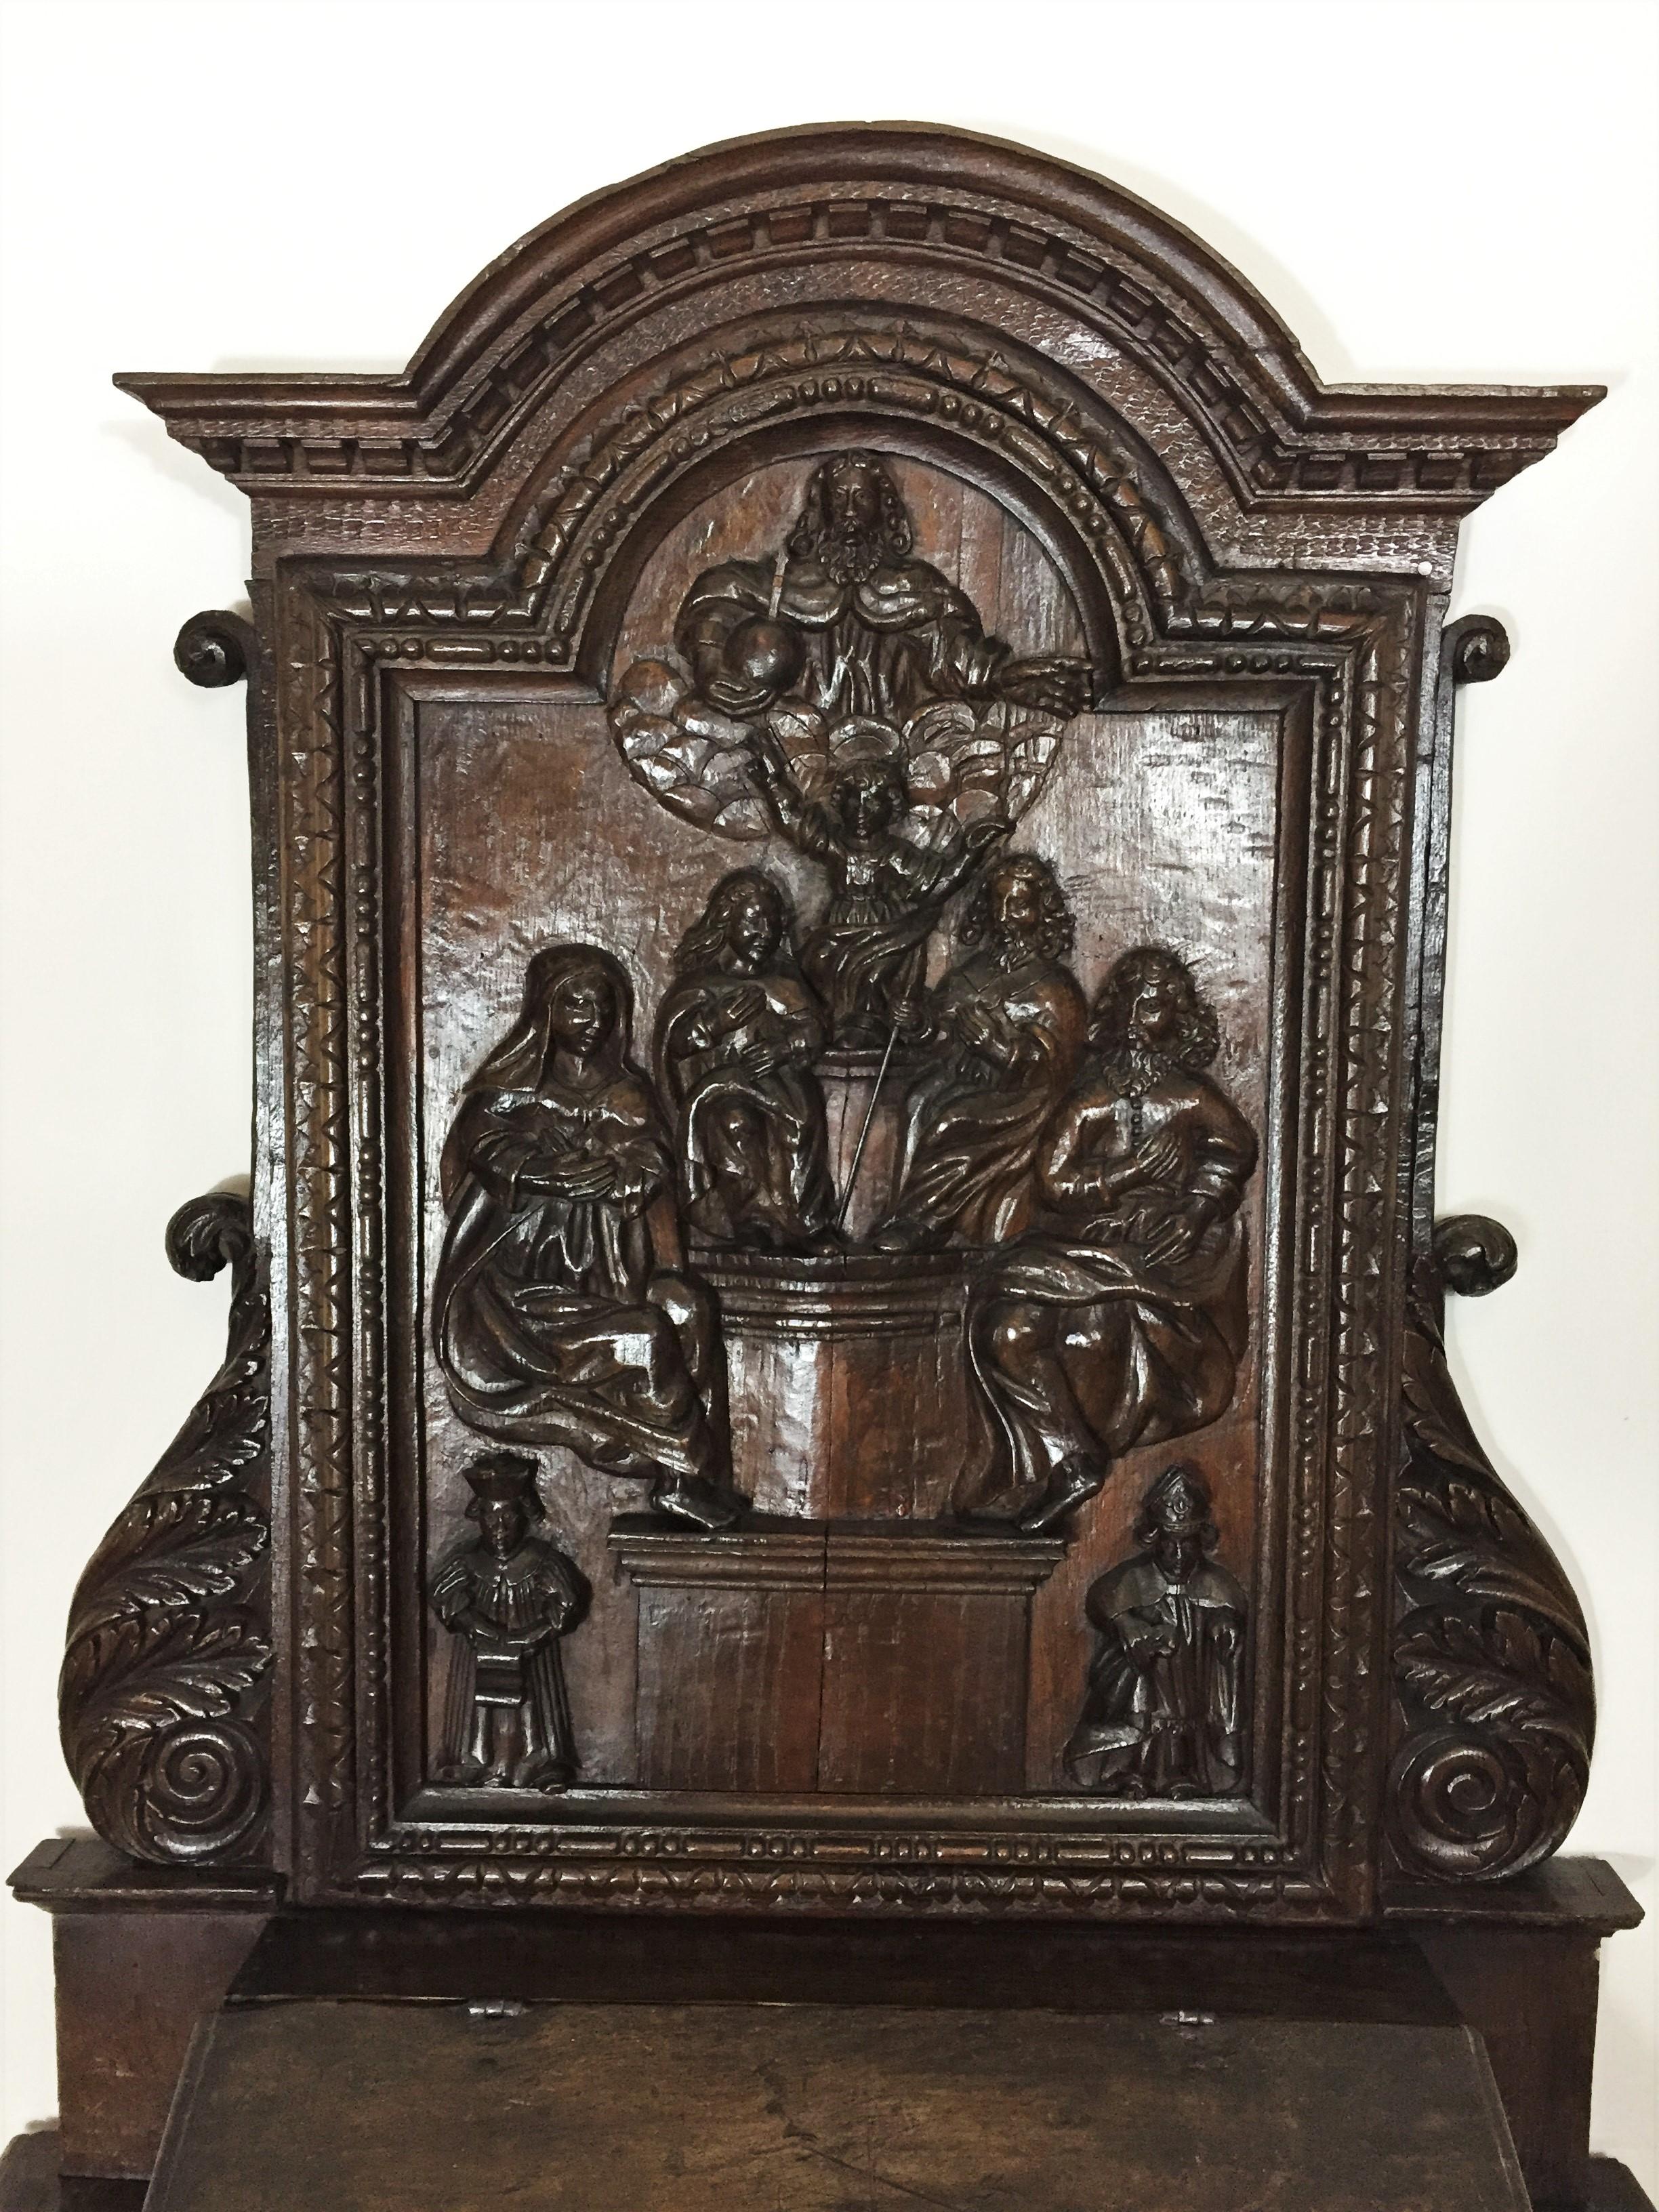 17th century oratory in chestnut with a Representation of the Holy Family Sacristy furniture in oak period Louis XIII with a panel hand carved representing child Jesus in majesty overhung by God the father carrying the orb, surrounded by St.